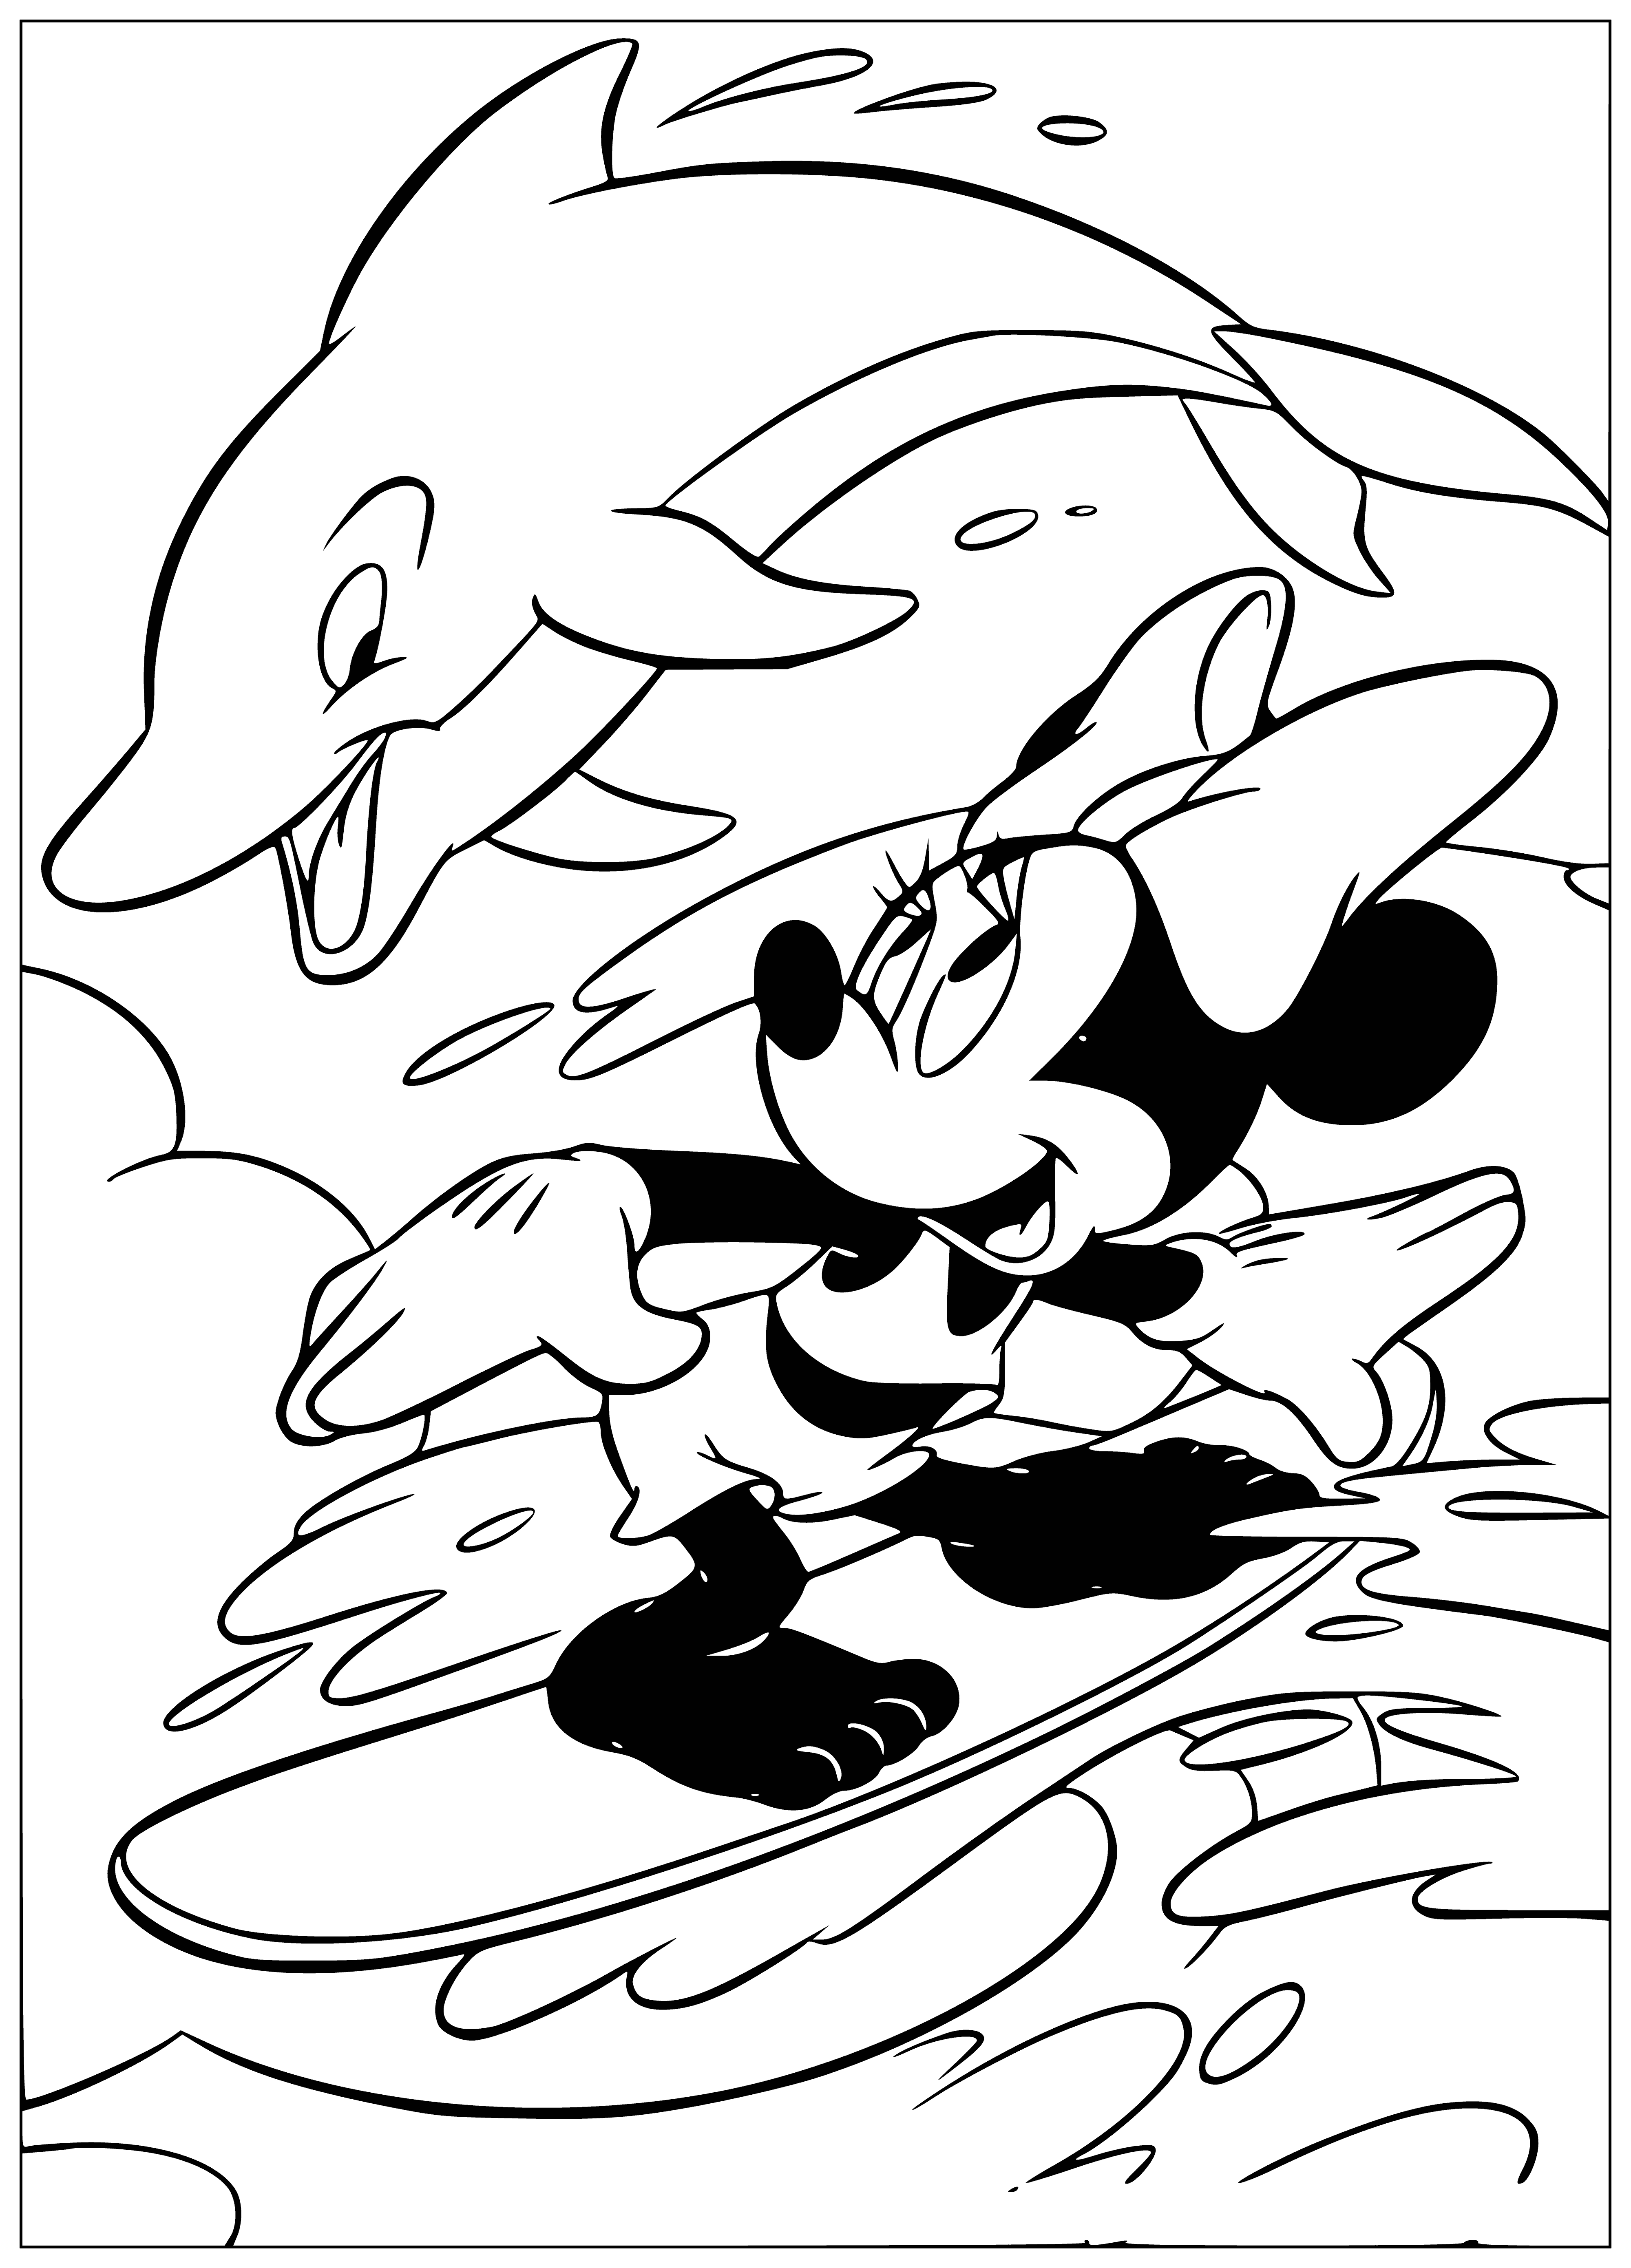 coloring page: Mickey, Minnie, Donald, Daisy, Goofy and Pluto all surfing on colorful boards! #SurfingIsFun